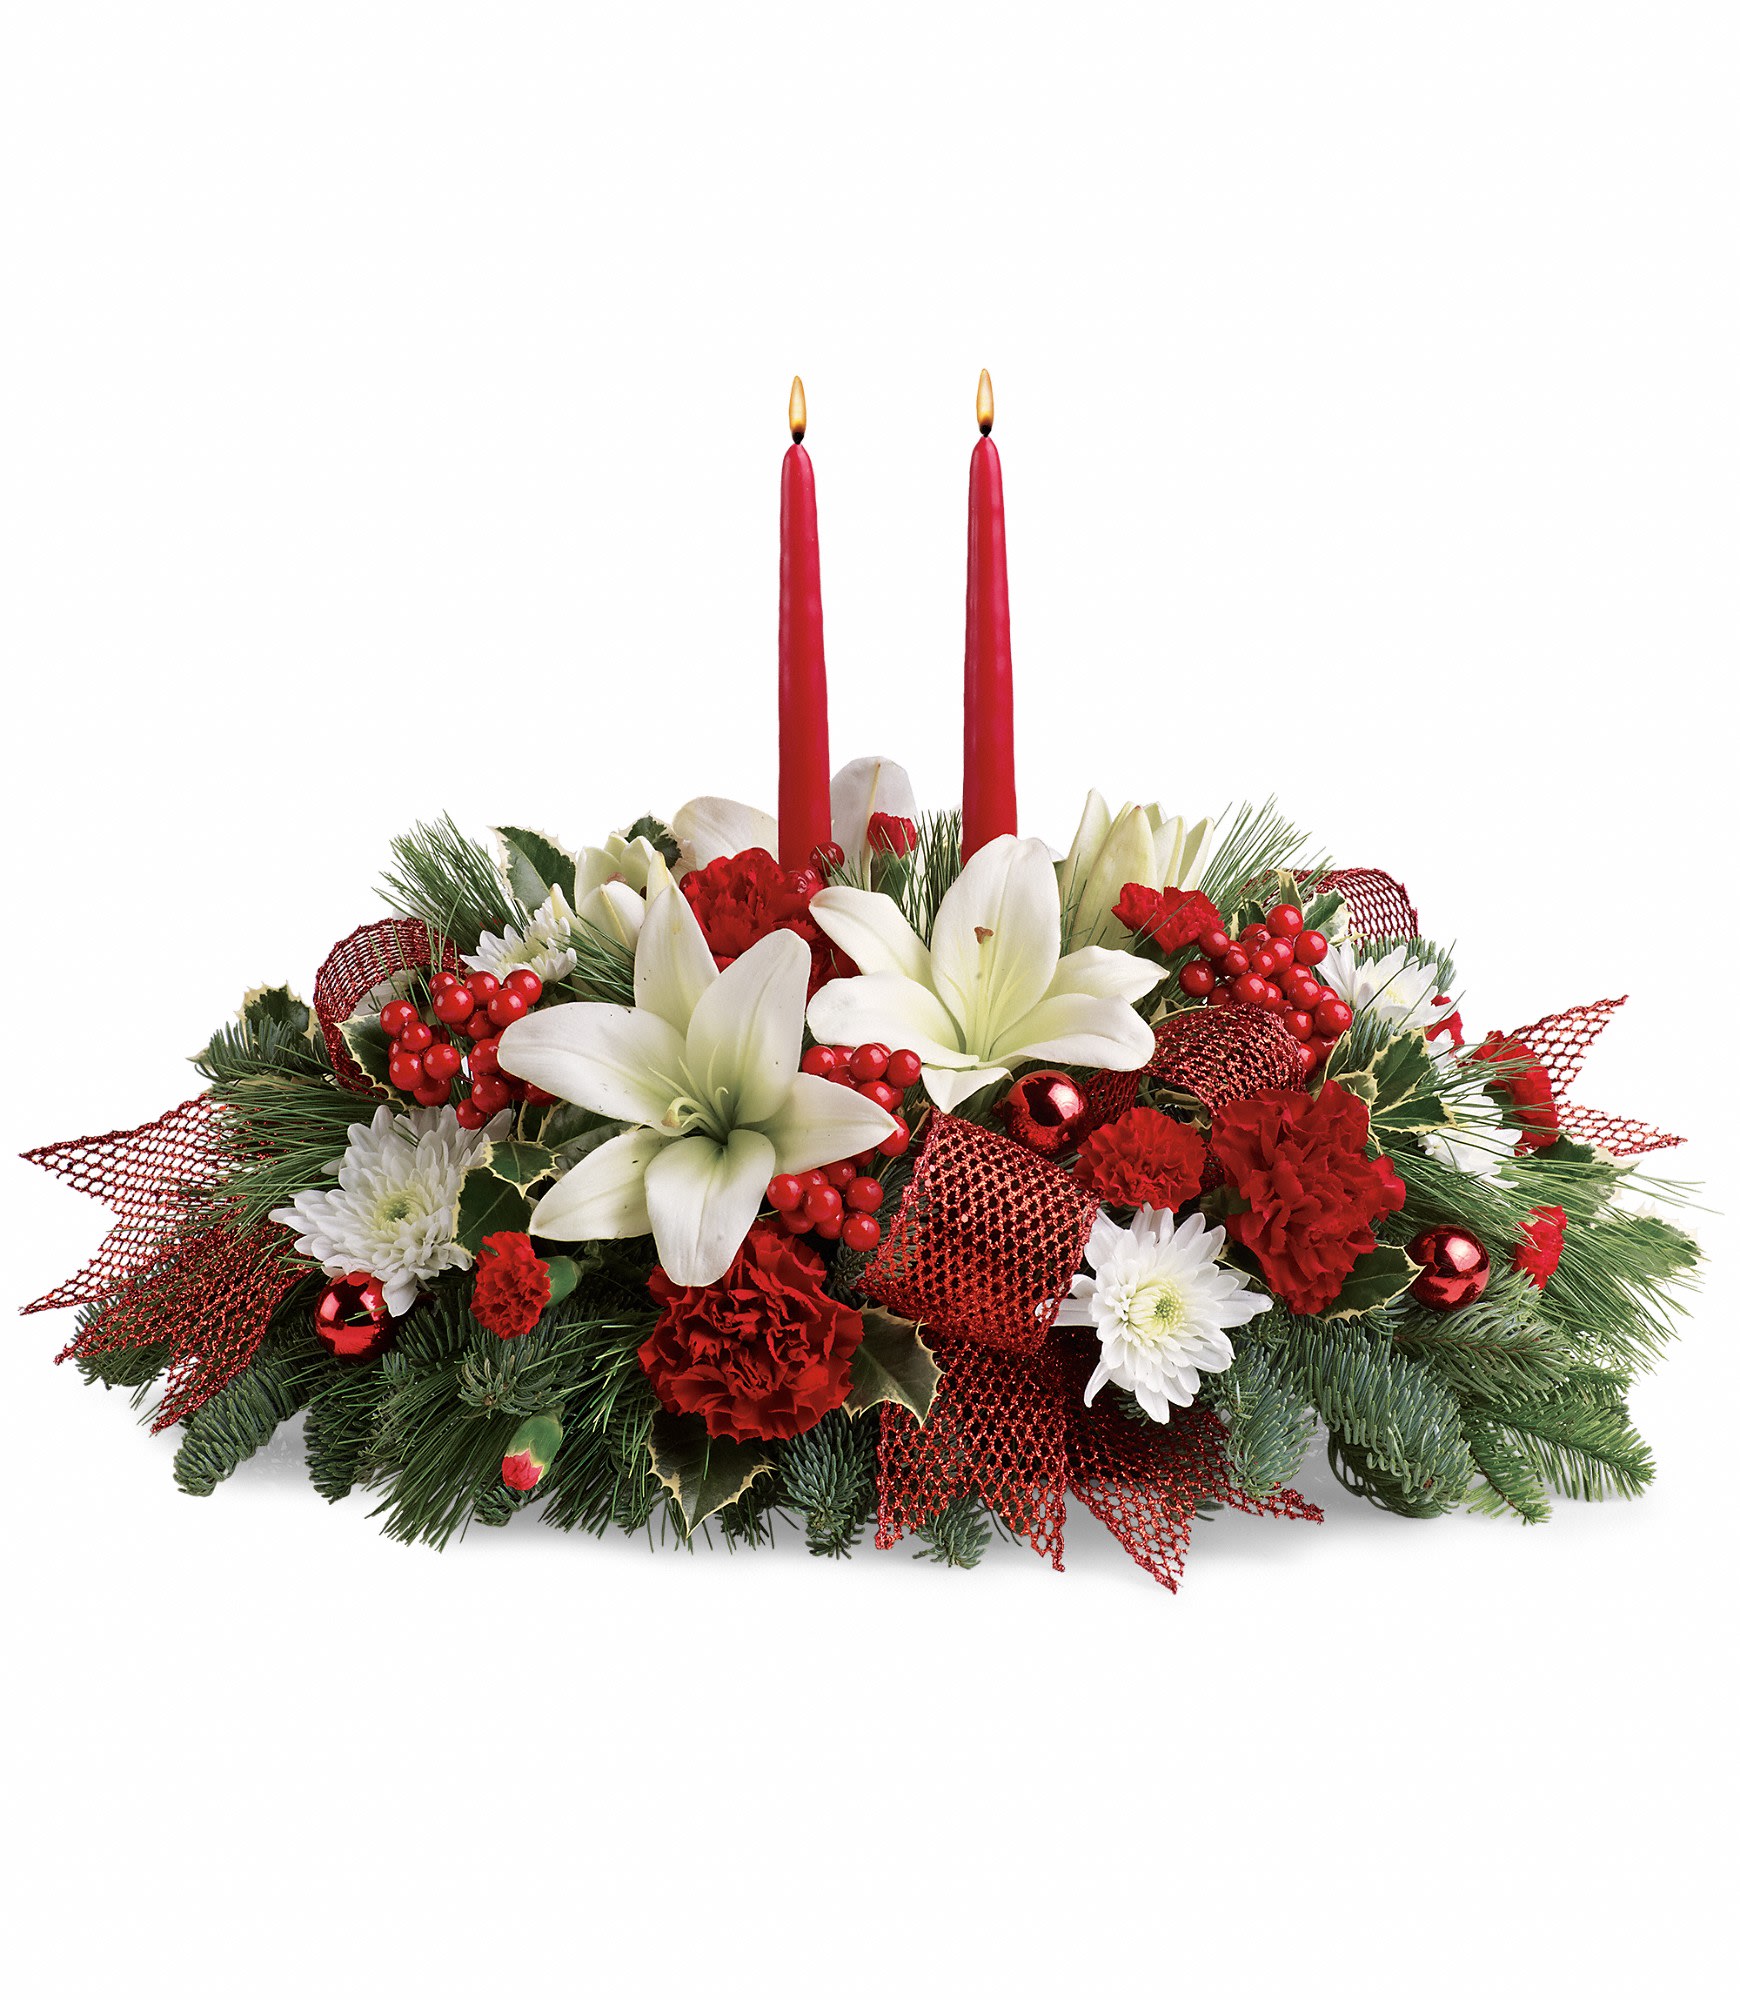 Yuletide Magic Centerpiece - White asiatic lilies, red carnations, red miniature carnations and white cushion spray chrysanthemums are accented with noble fir, white pine, variegated holly, berries and festive red ribbon. Approximately 21 1/2&quot; W x 15&quot; H.  TWR12-3A